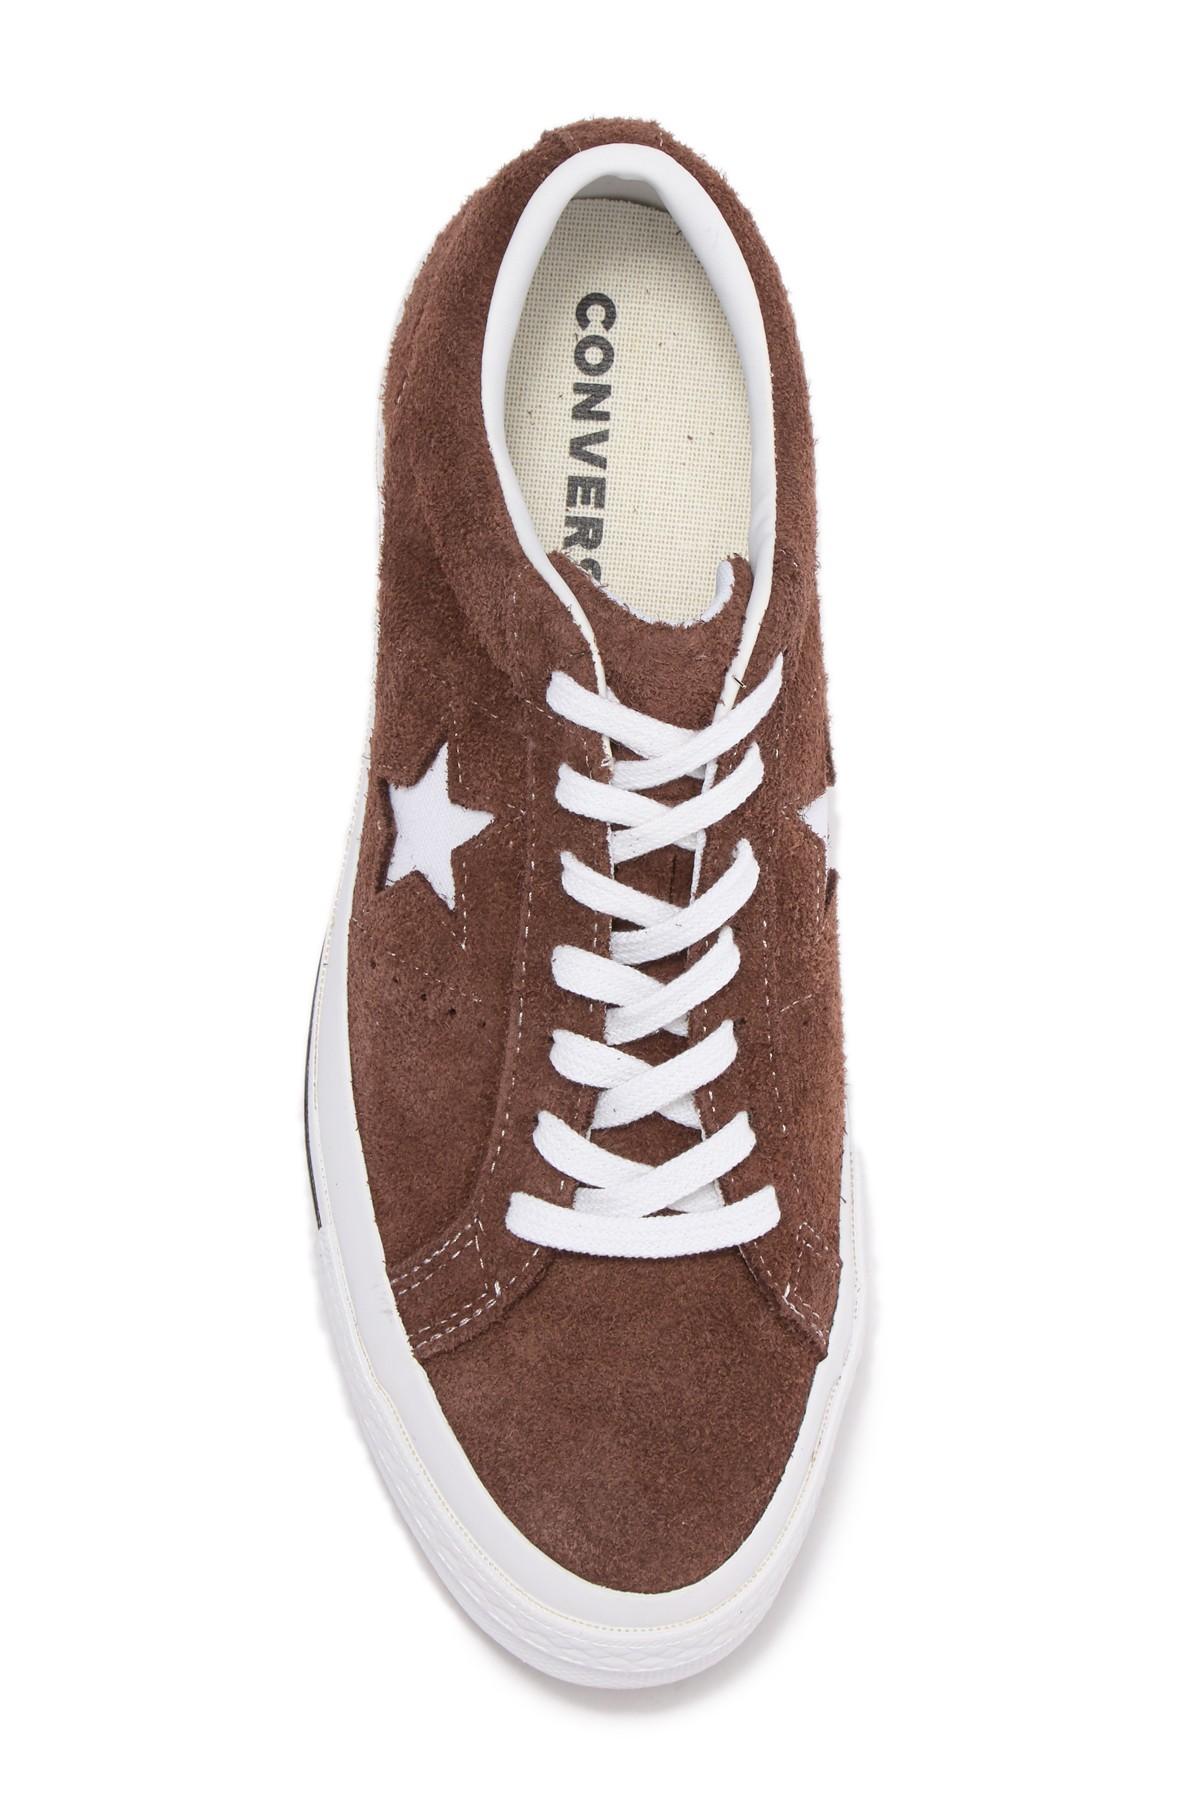 Converse One Star Oxford Suede Sneaker (unisex) in Chocolate/White (Brown)  for Men | Lyst